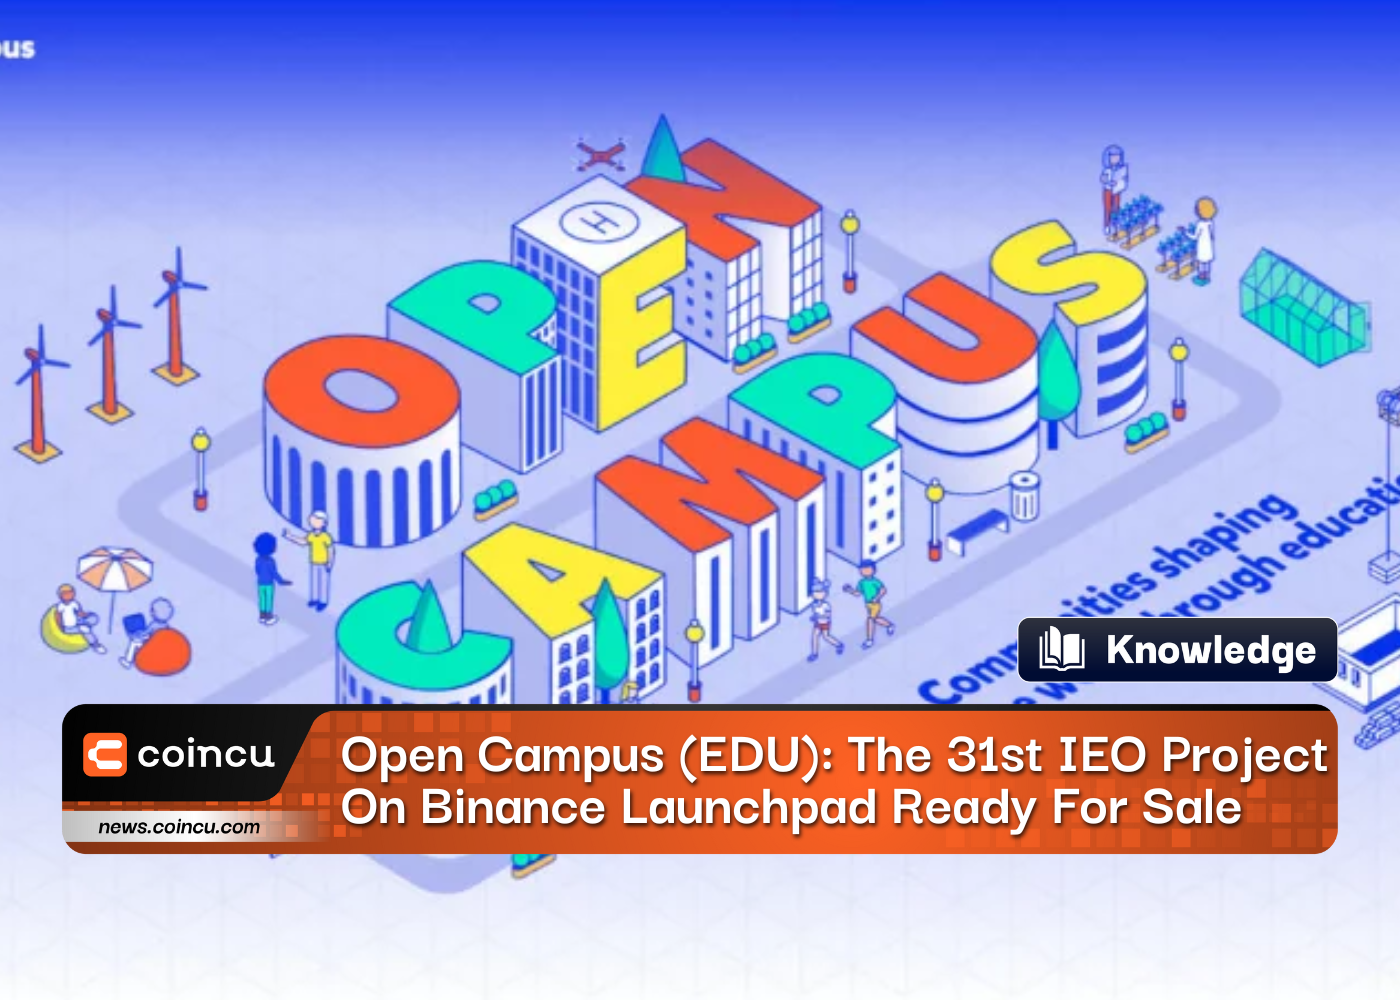 Open Campus (EDU): The 31st IEO Project On Binance Launchpad Ready For Sale